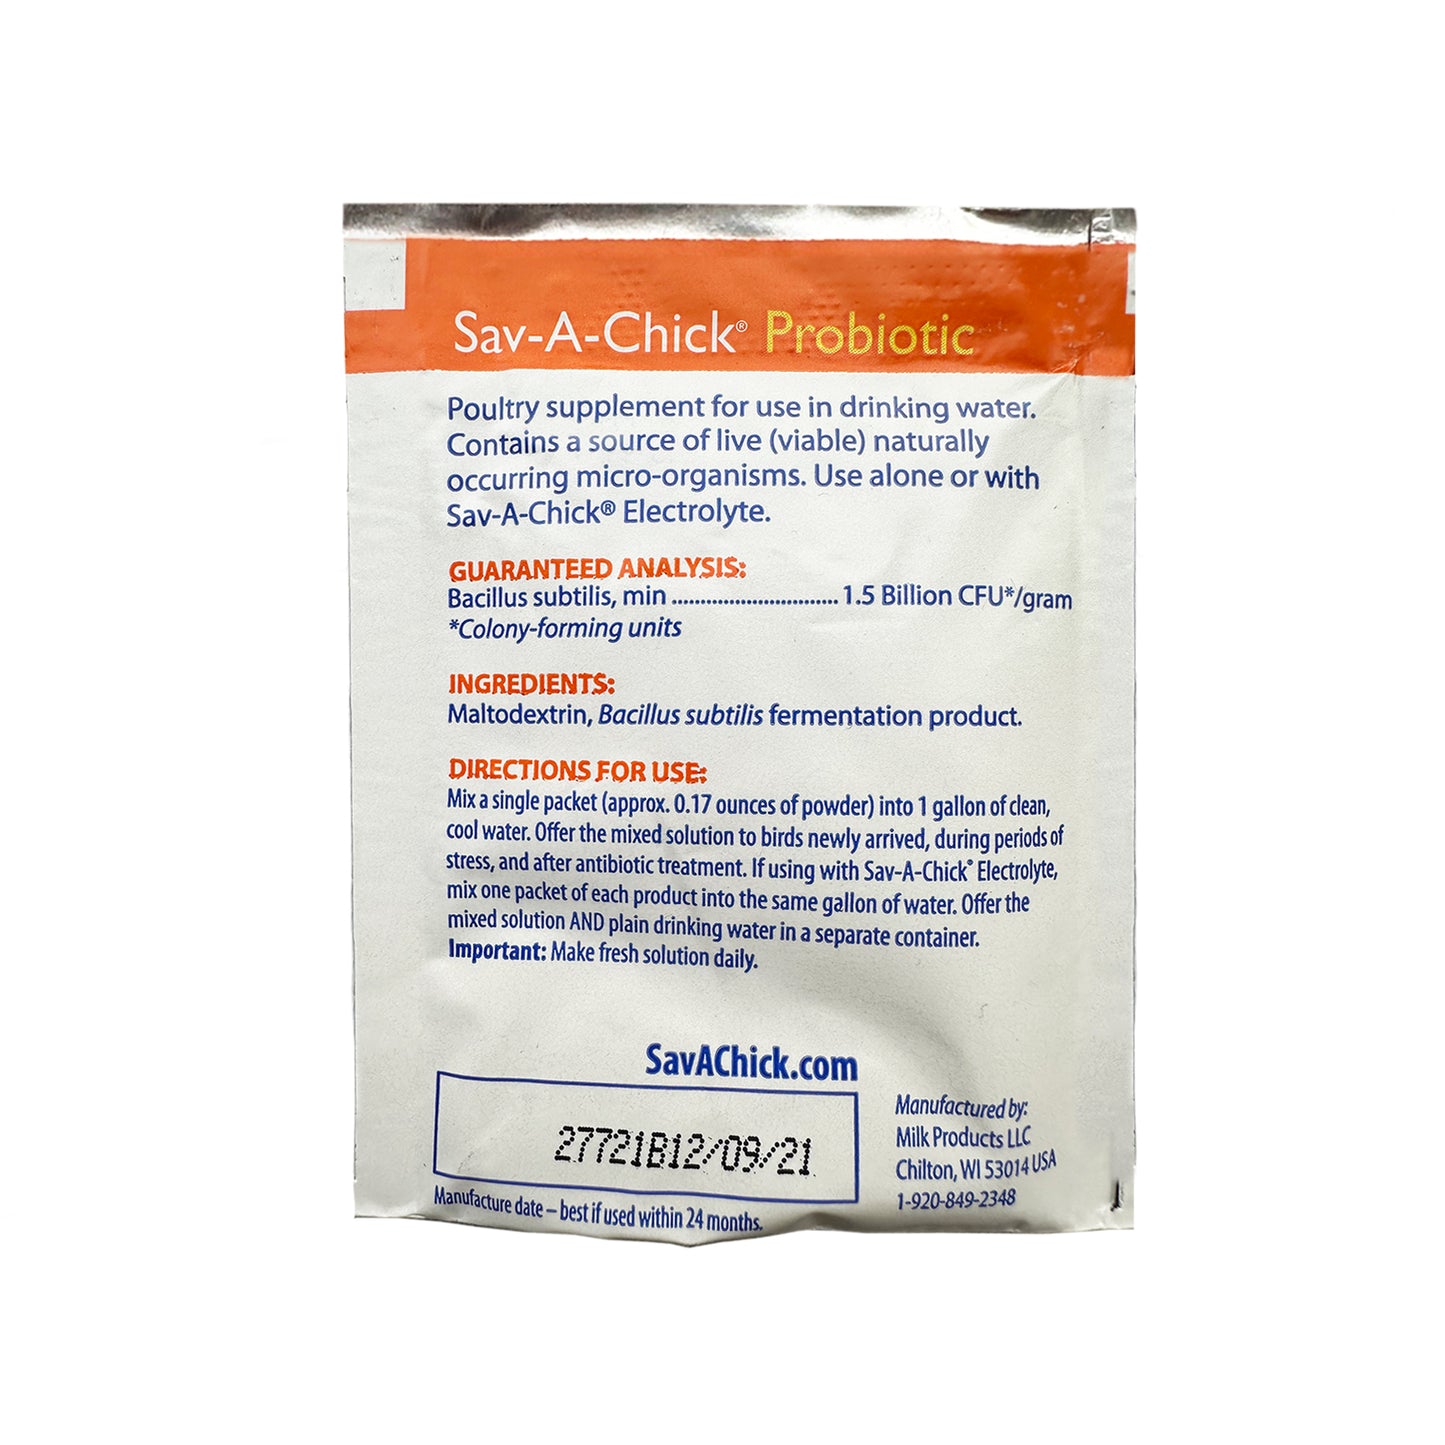 Sav-A-Chick Poultry Probiotic, Pack of 3